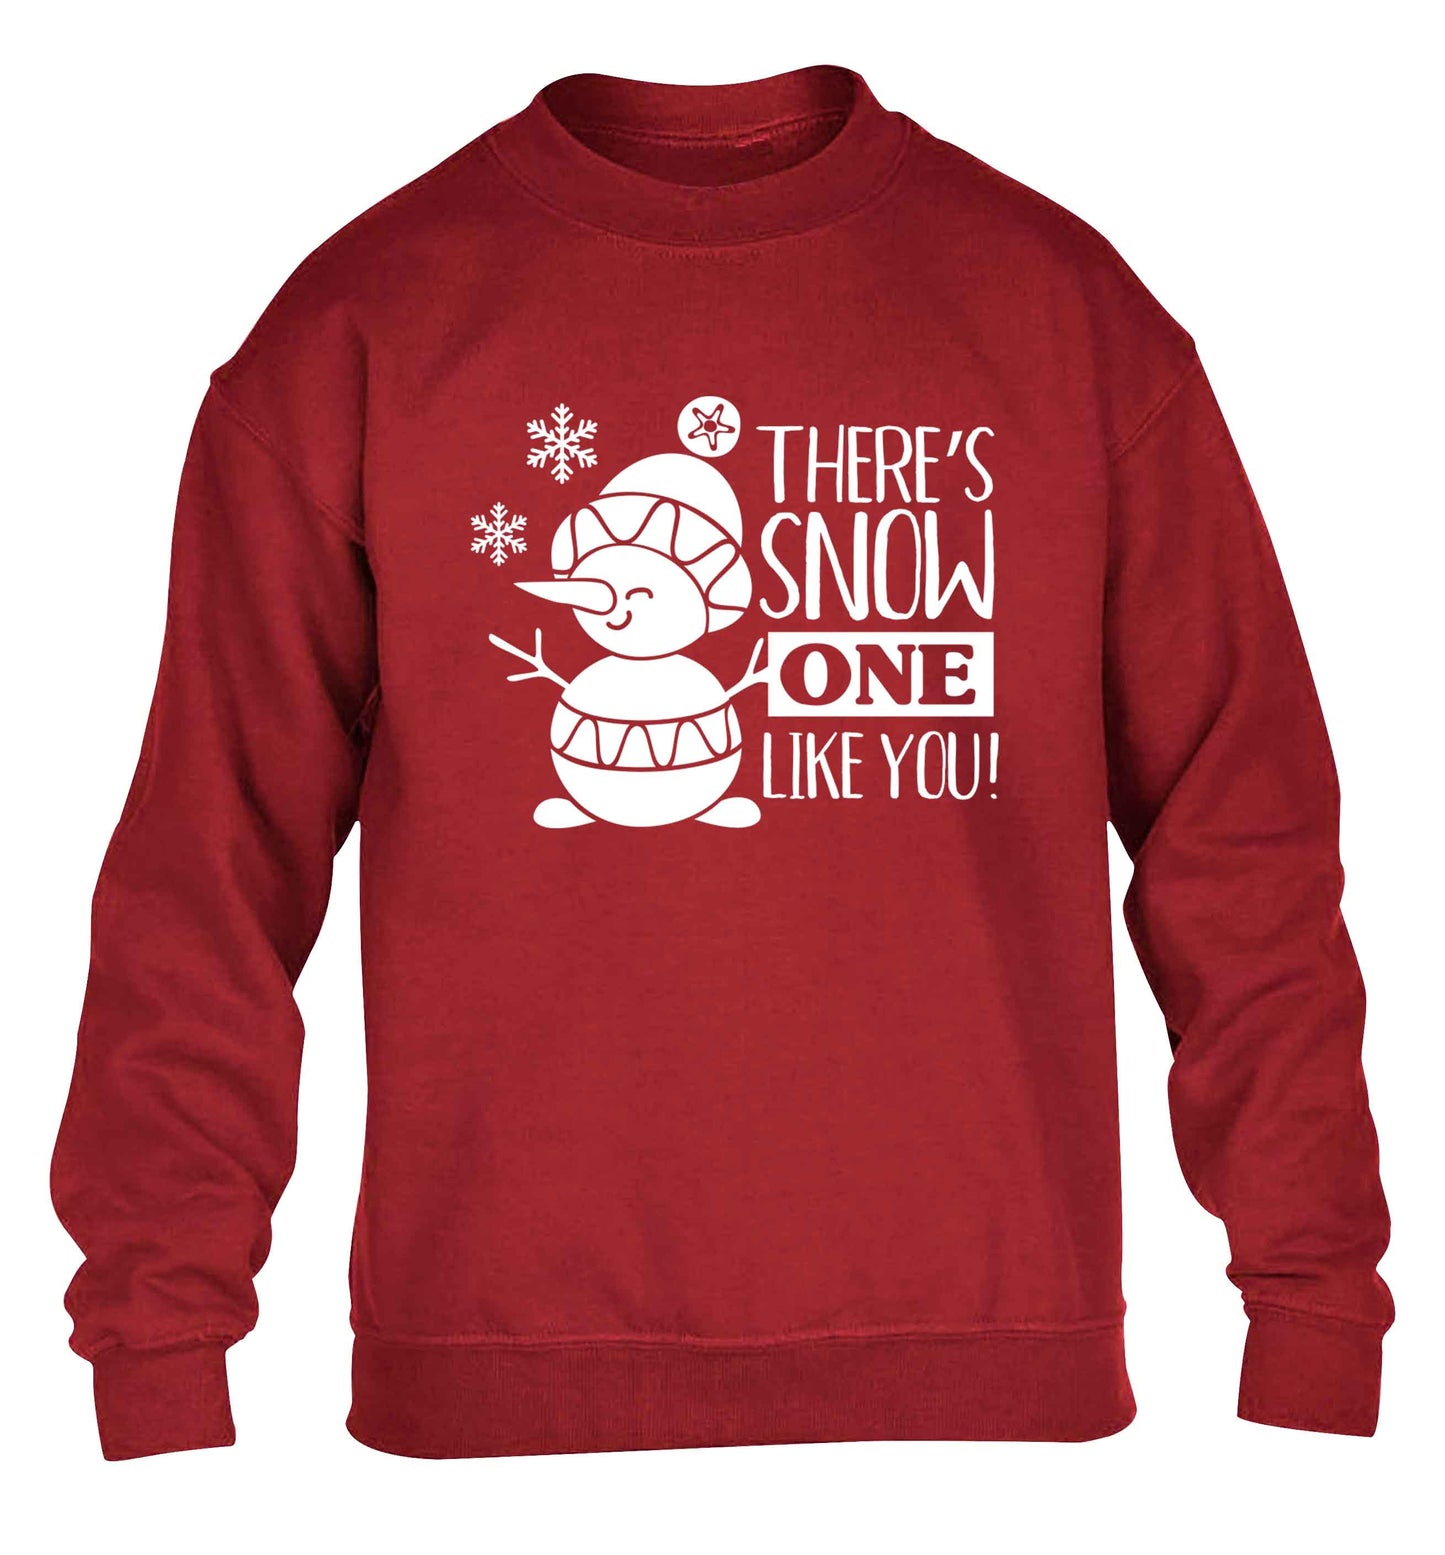 There's snow one like you children's grey sweater 12-13 Years